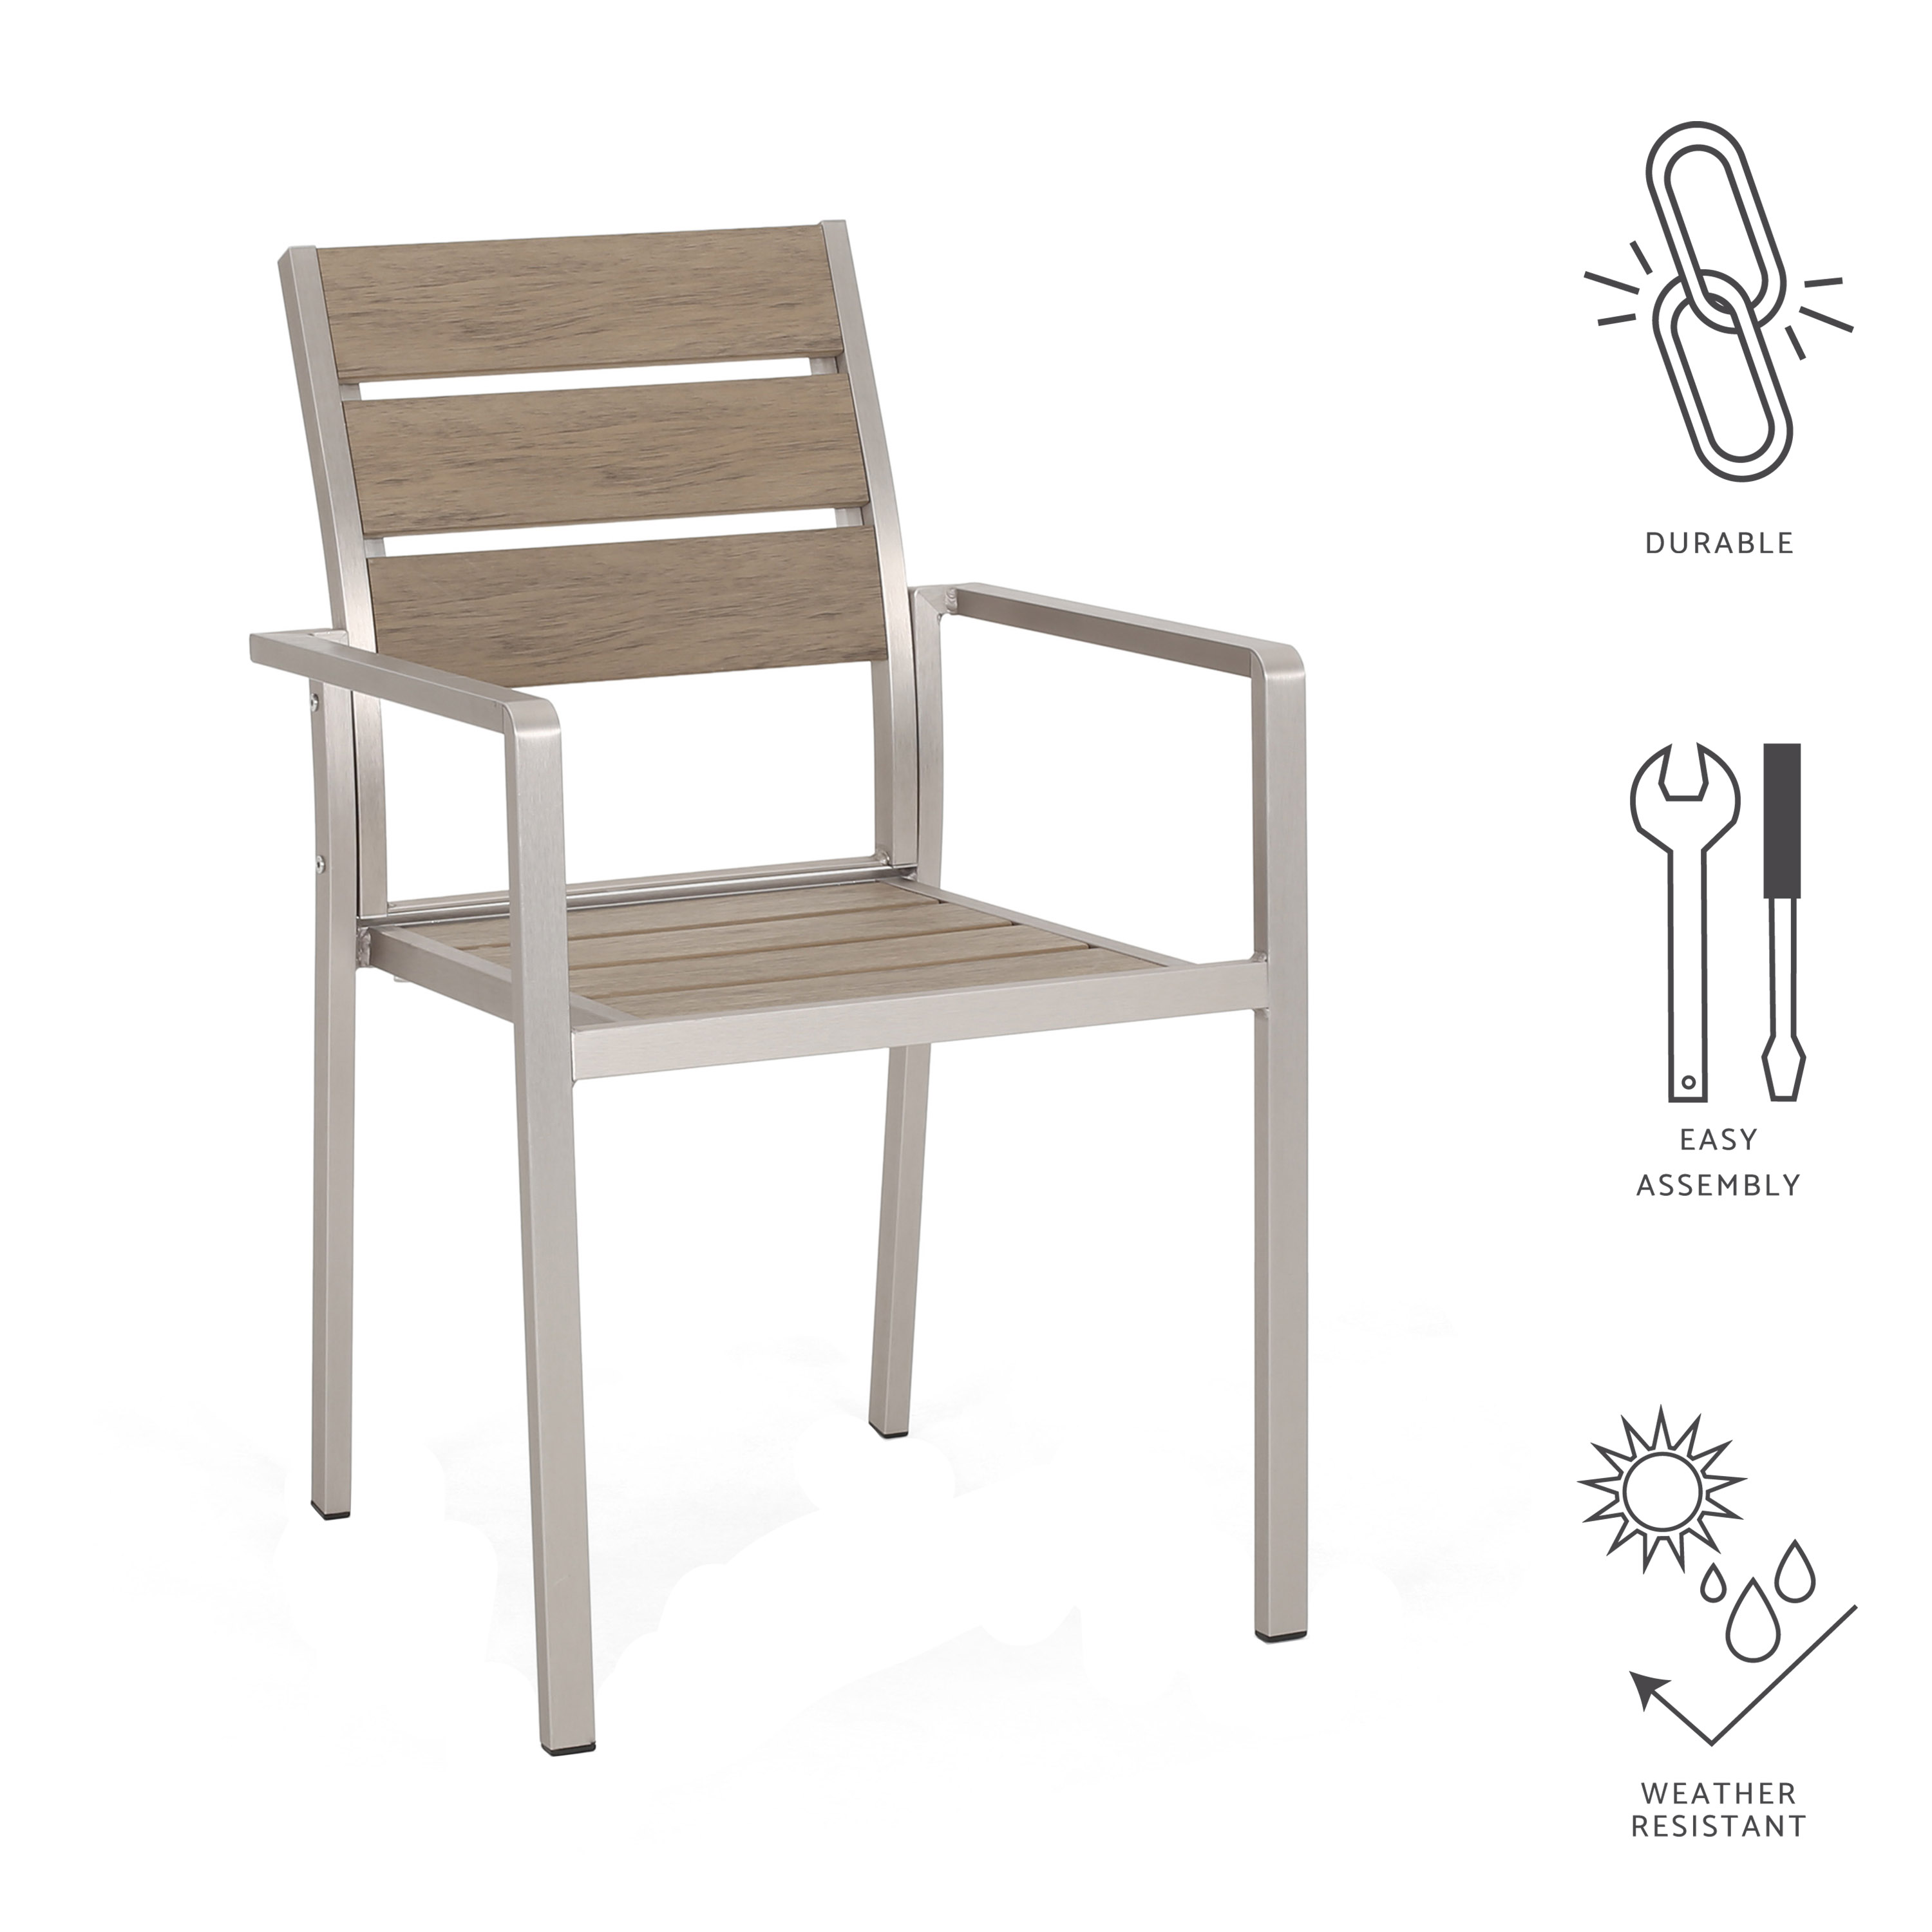 GDF Studio Cherie Outdoor Modern Aluminum Dining Chair with Faux Wood Seat (Set of 2), Natural and Silver - image 3 of 12